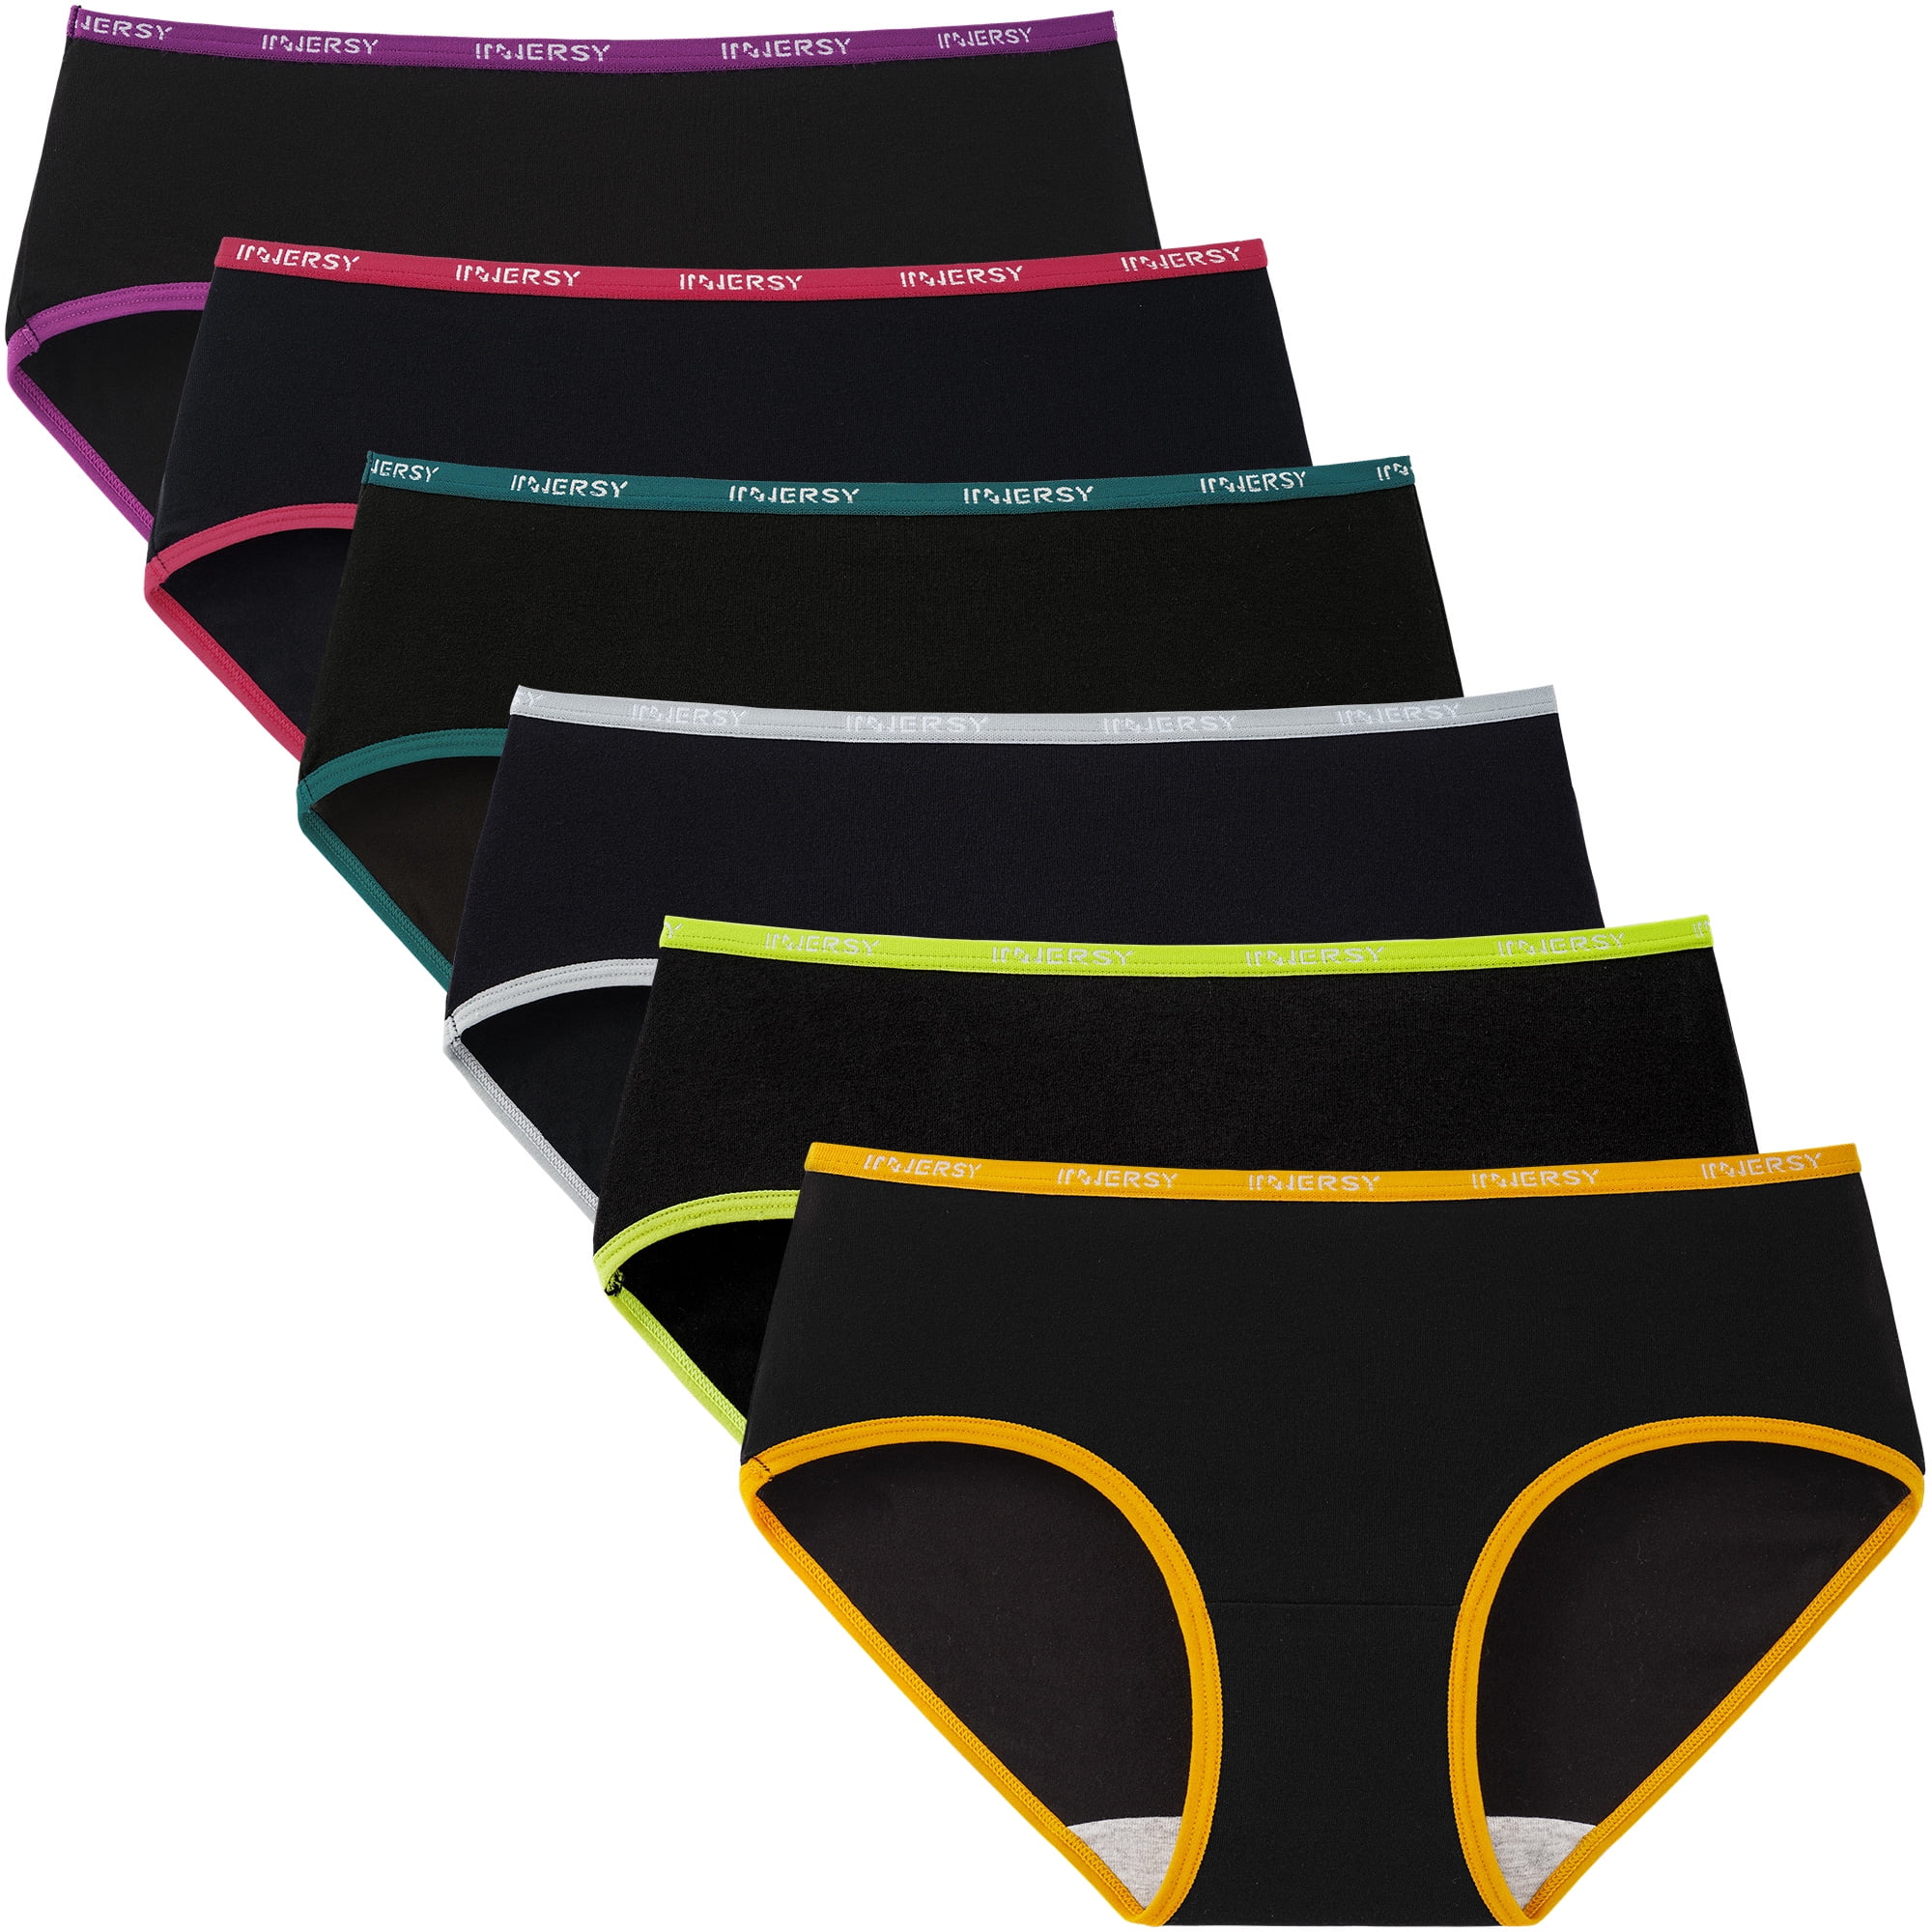 INNERSY Womens Underwear Cotton Briefs High Waisted Postpartum Panties 5  Pack (M, Blacks With Contrast Waistband) 